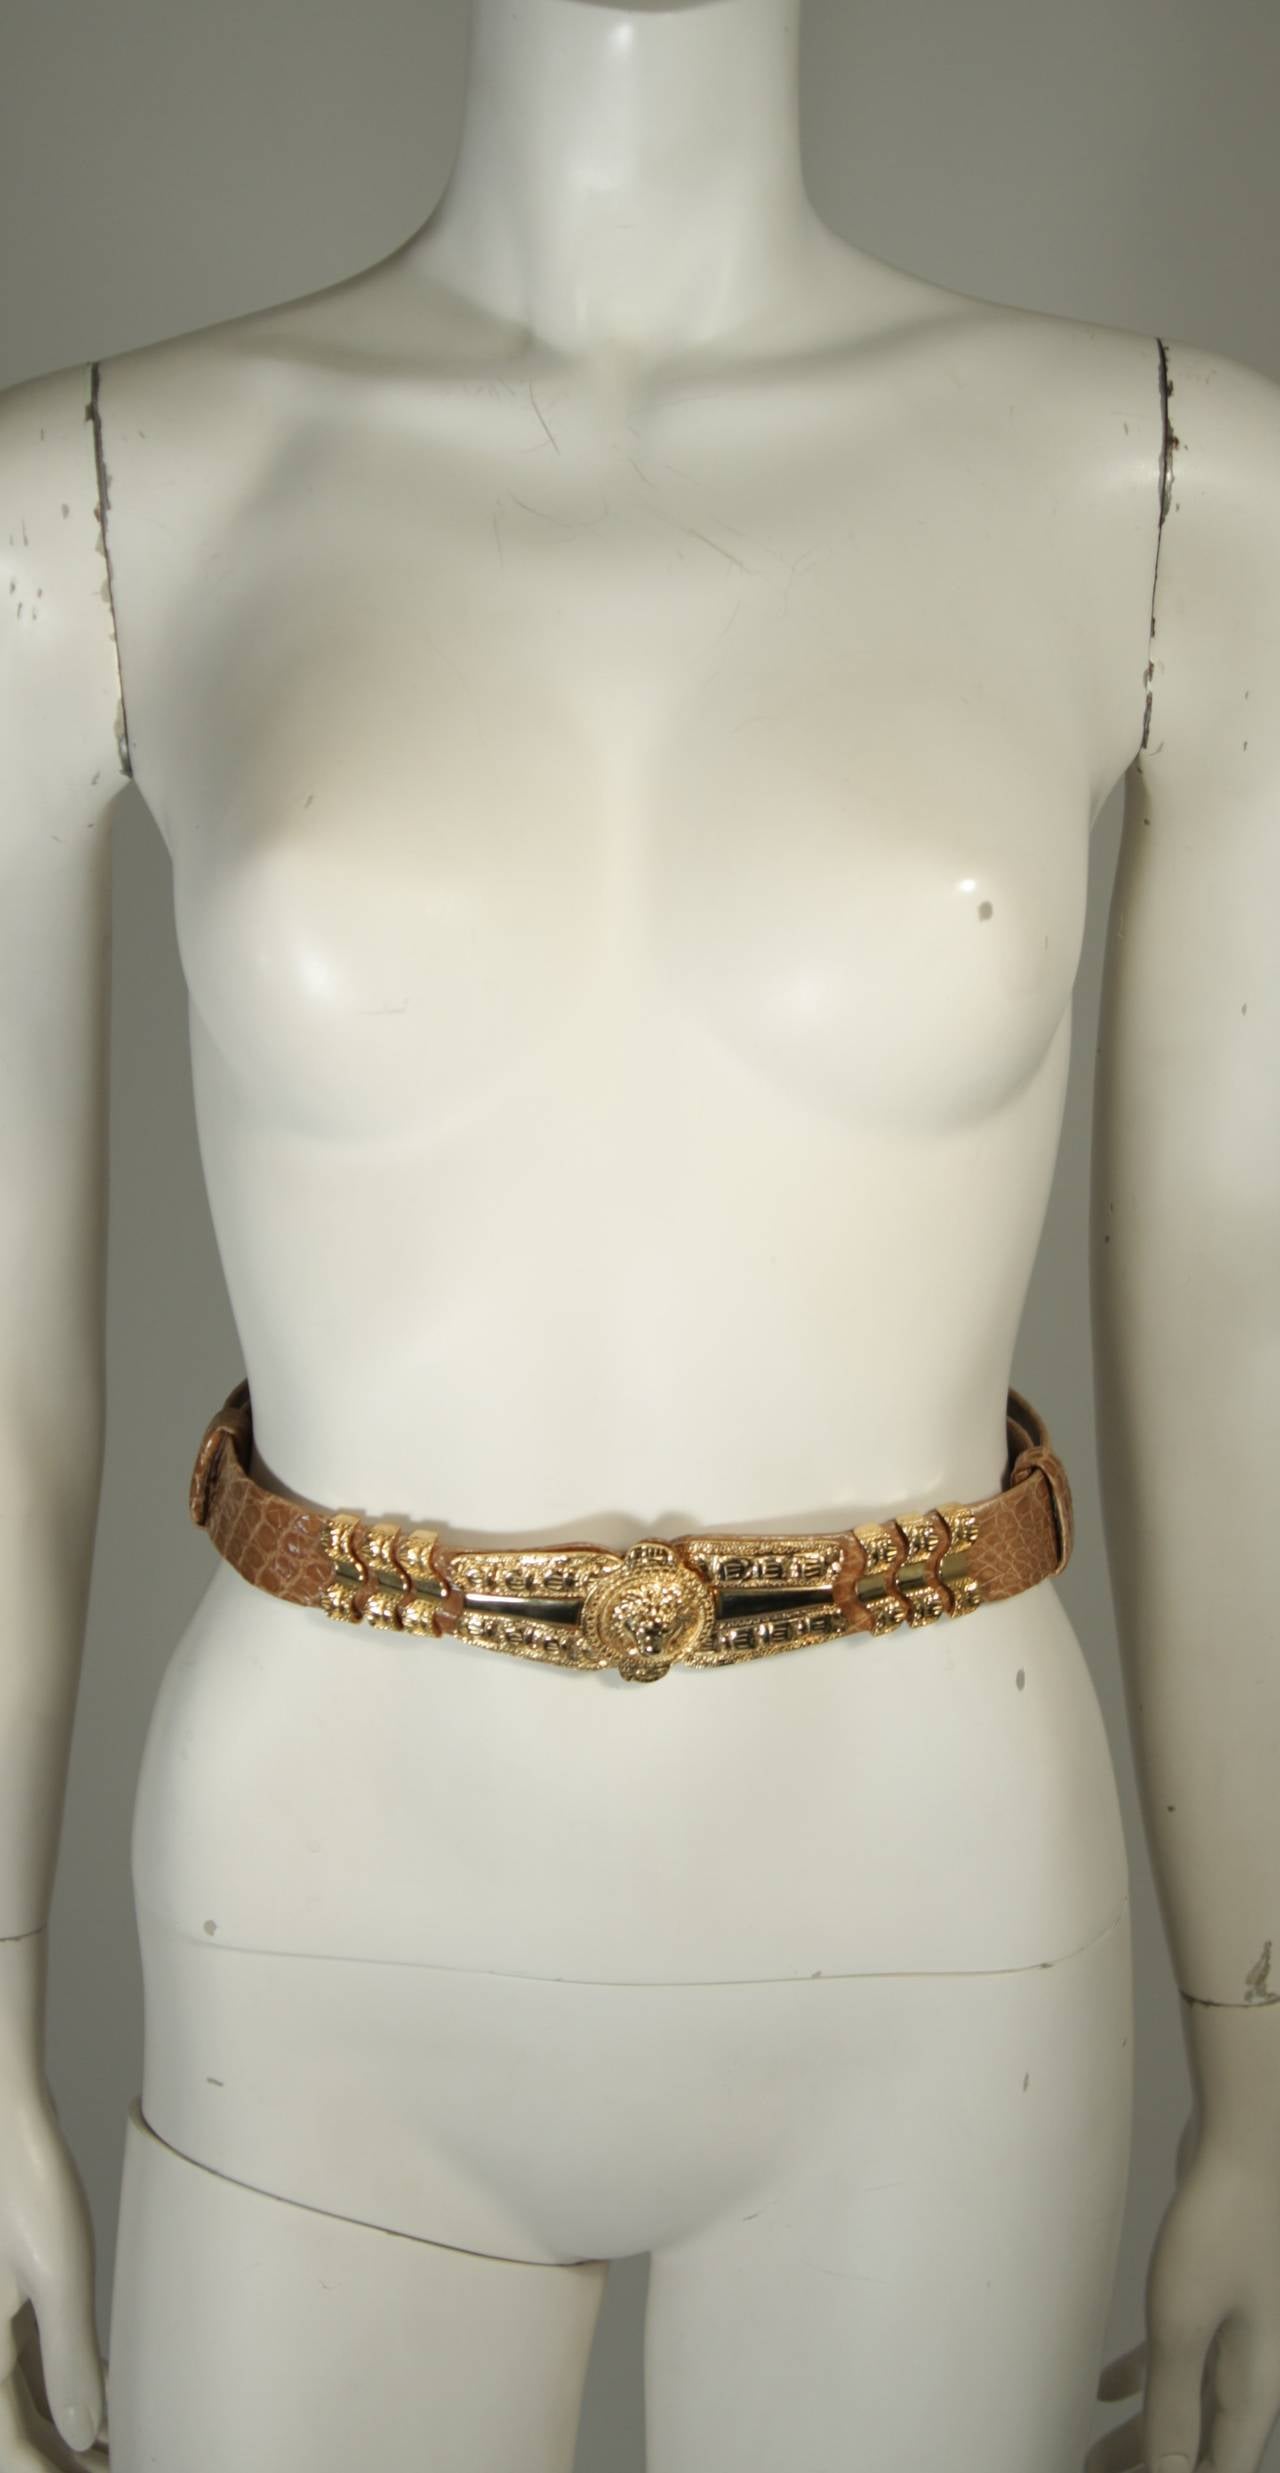 This Judith Leiber is available for viewing at our Beverly Hills Boutique. We offer a large selection of evening gowns and luxury garments.

This belt is composed of a khaki/ camel hued Alligator skin and features gold hardware. The belt buckle is